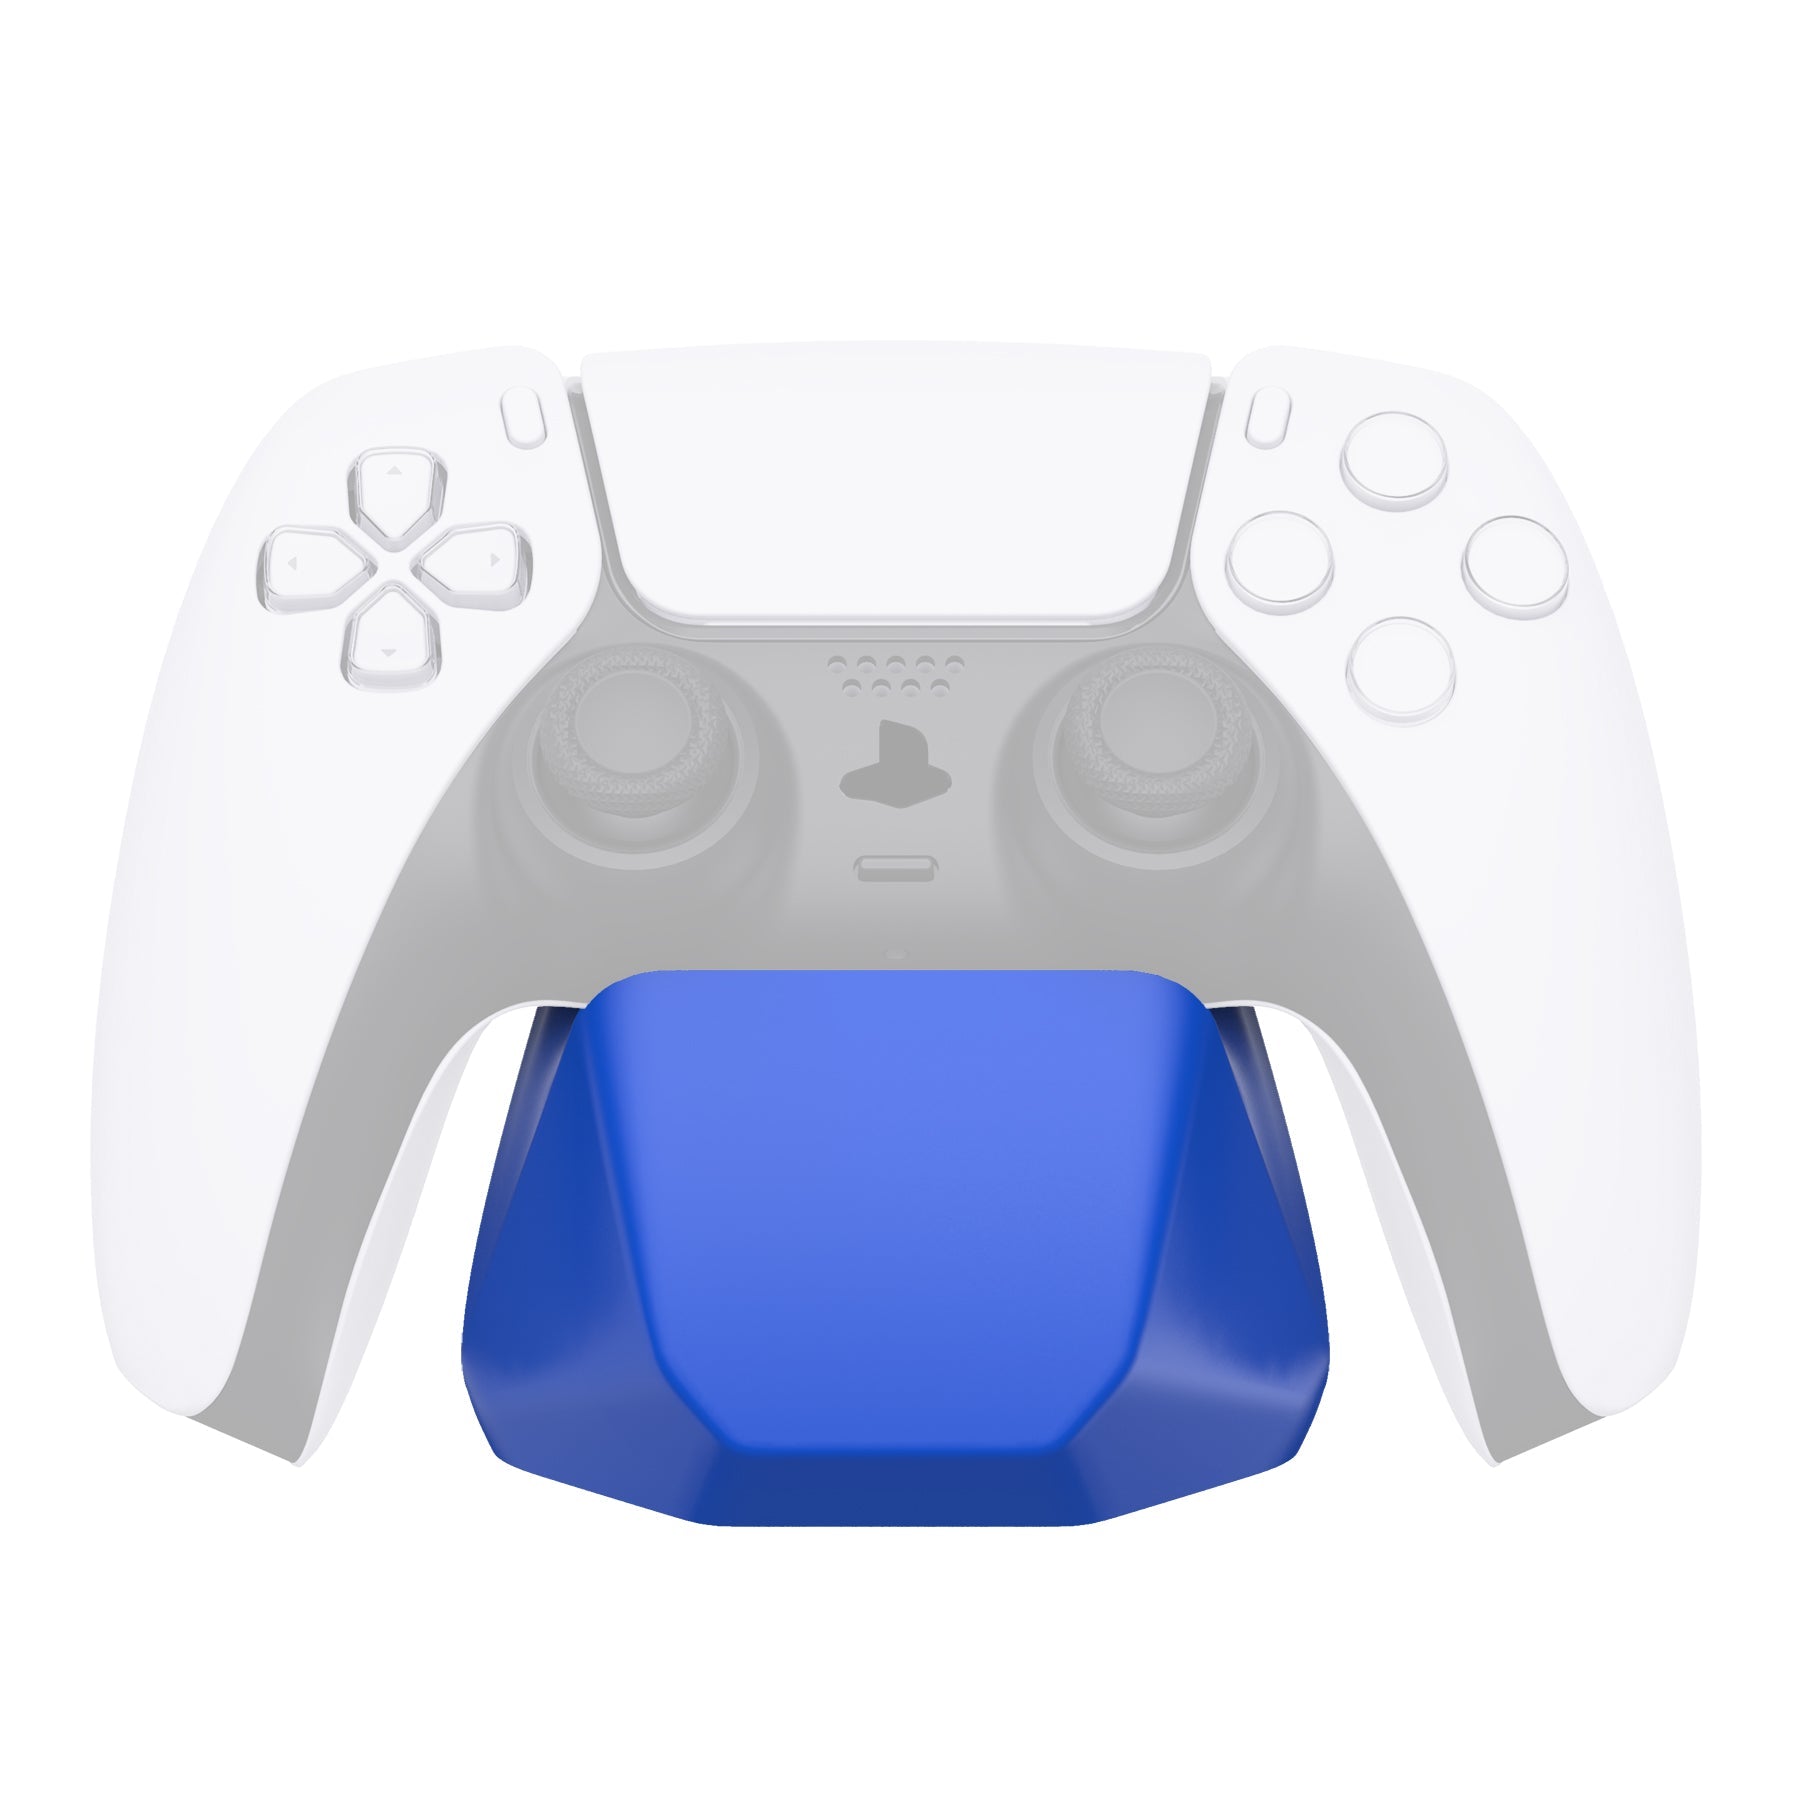 Now Gamepad Support! Xbox Controller And PS4 Controller - Devil